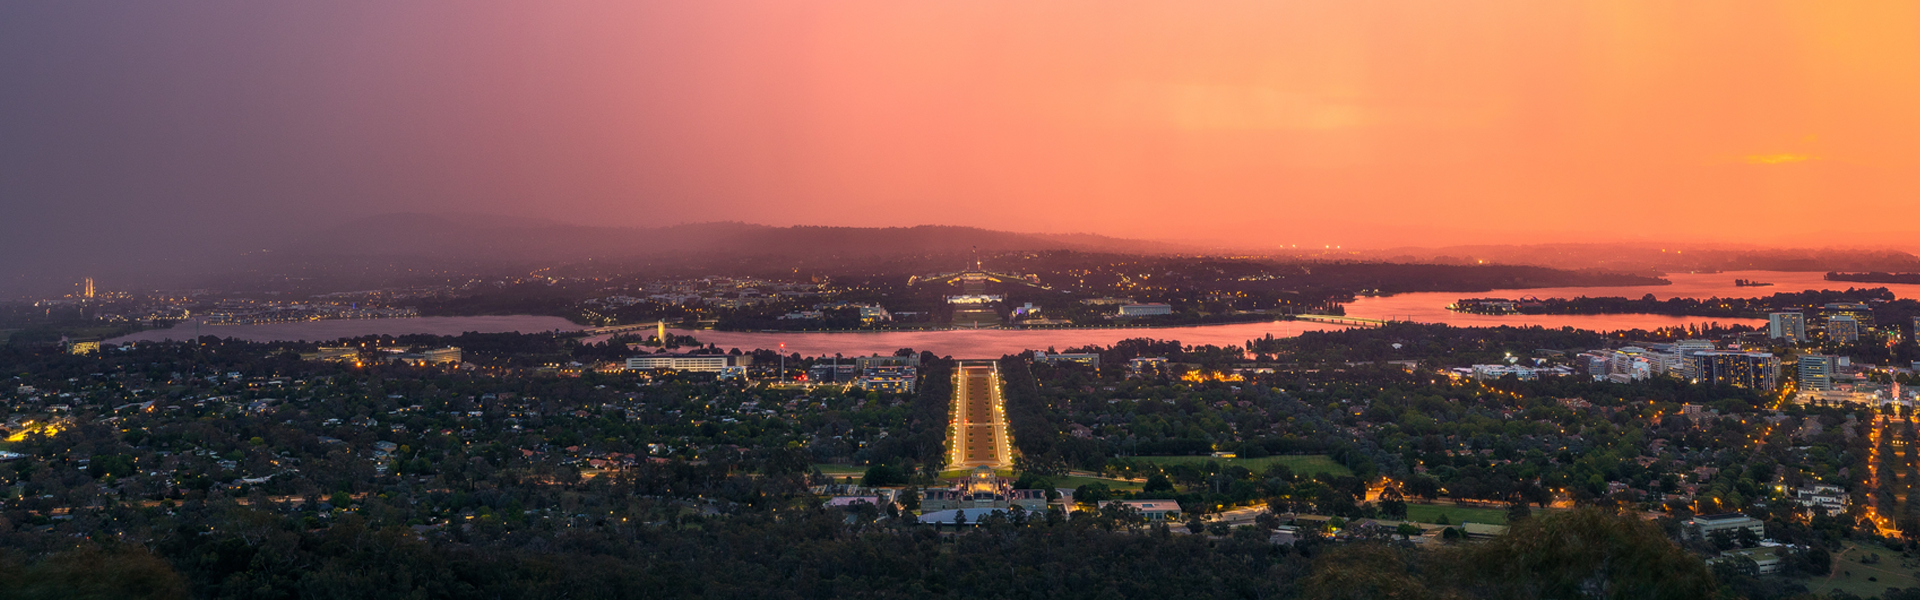 View from Mount Ainslie at sunset